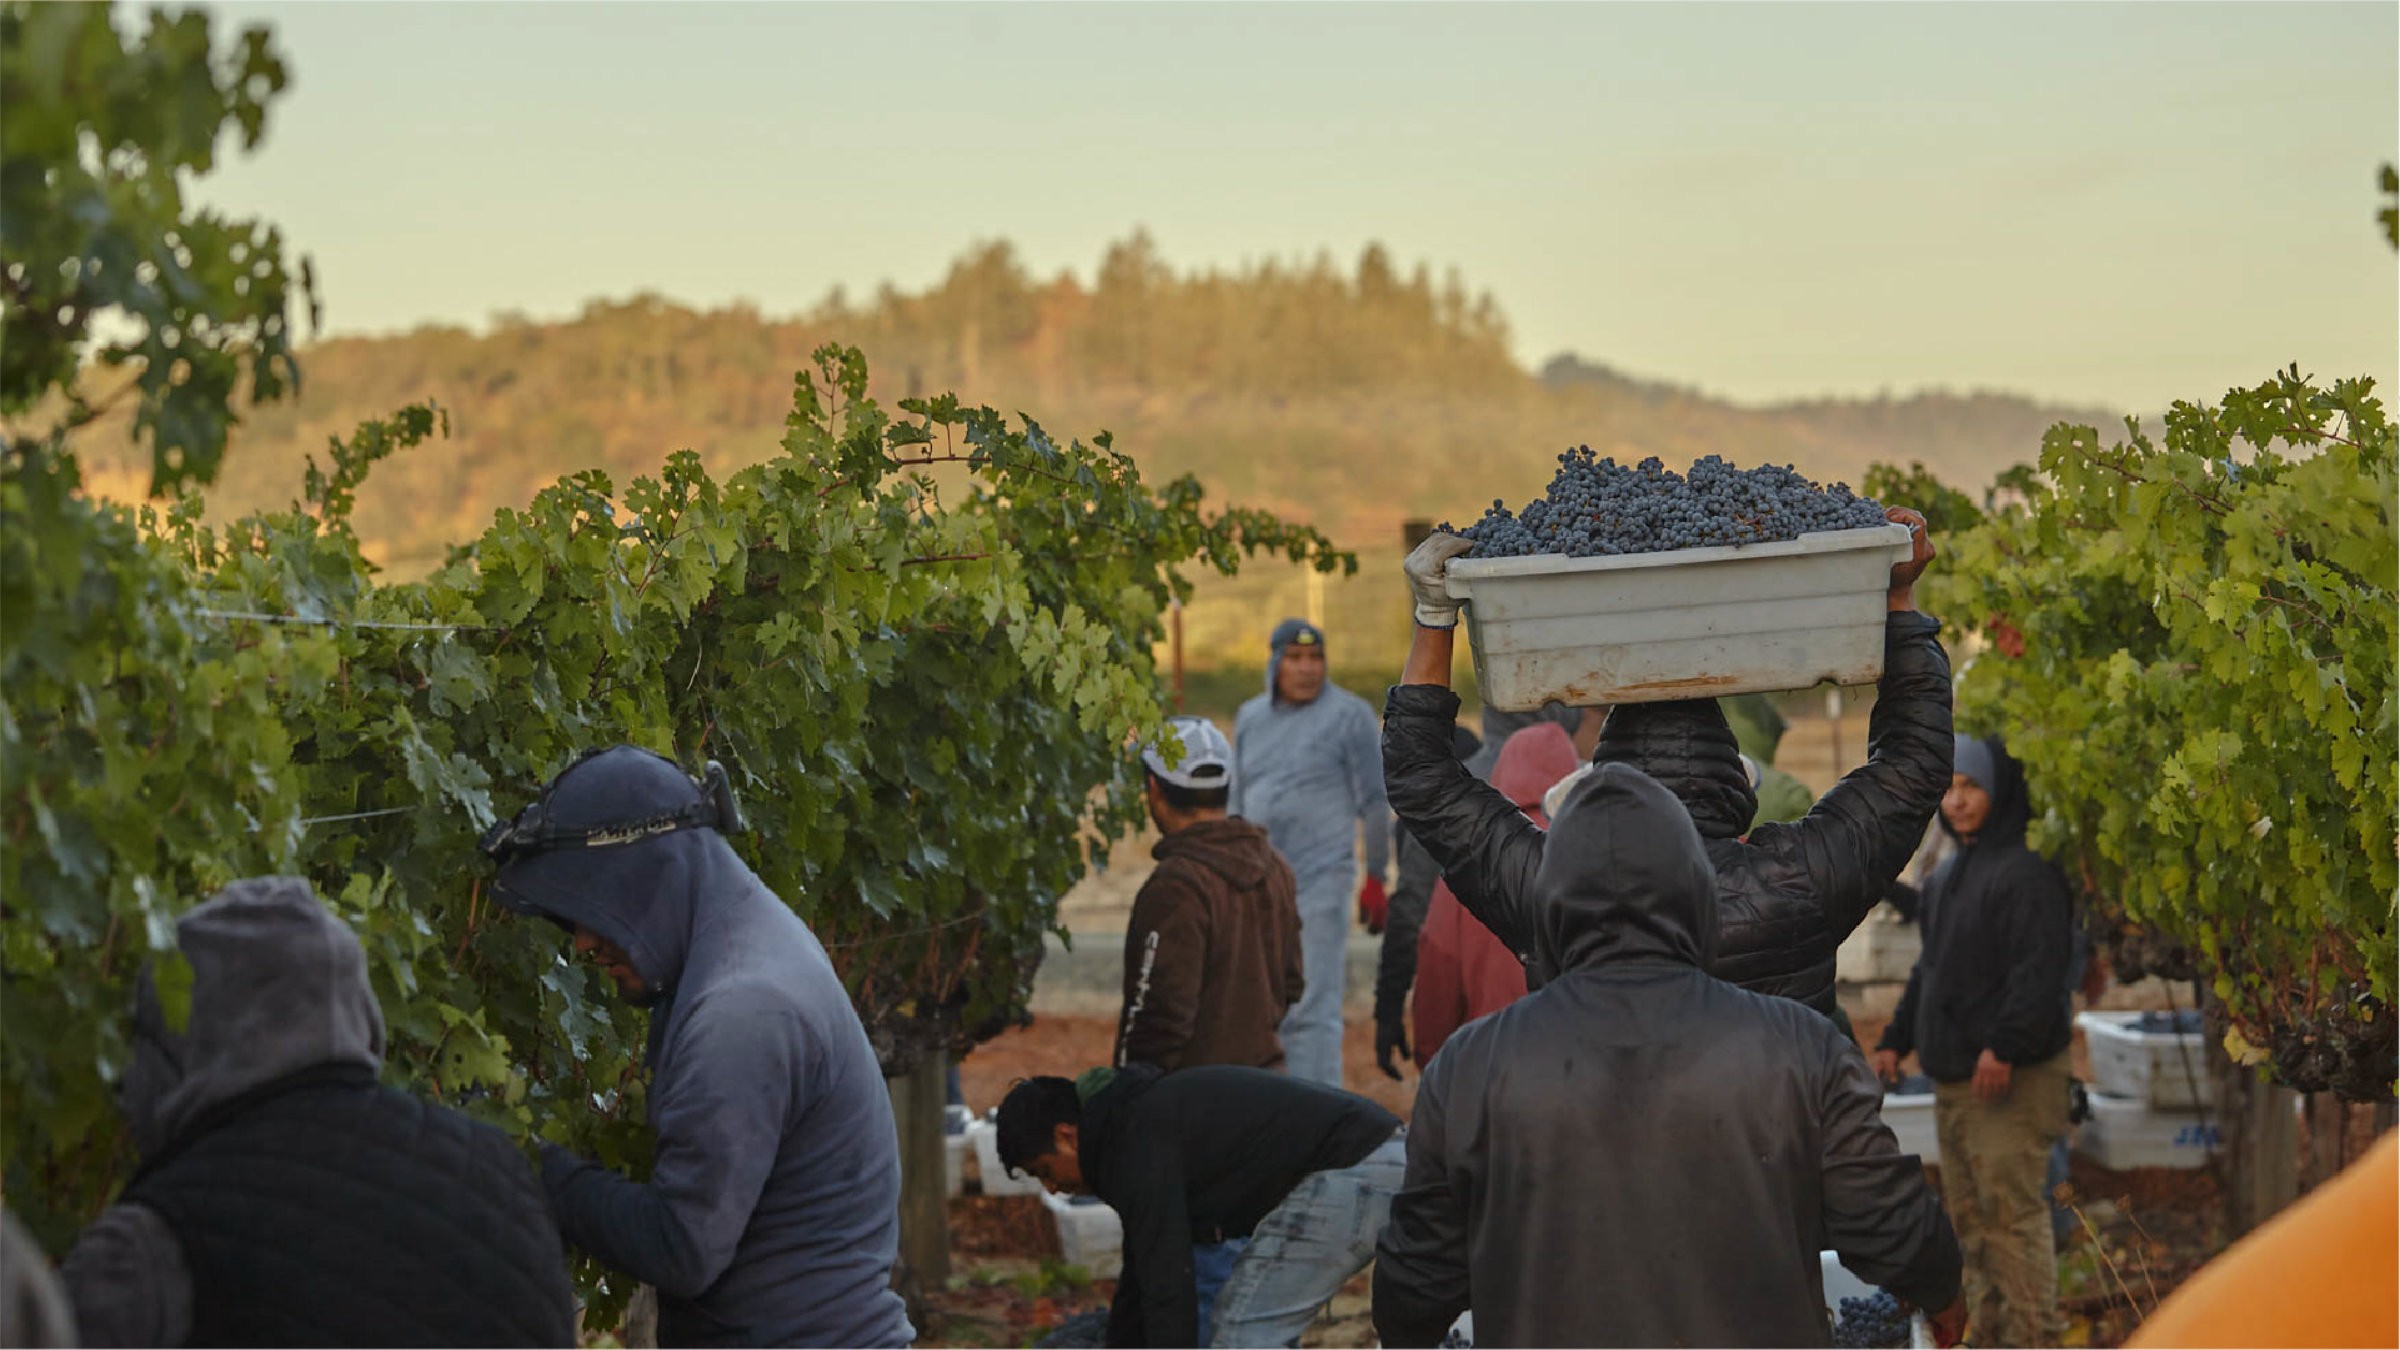 Workers harvesting grapes